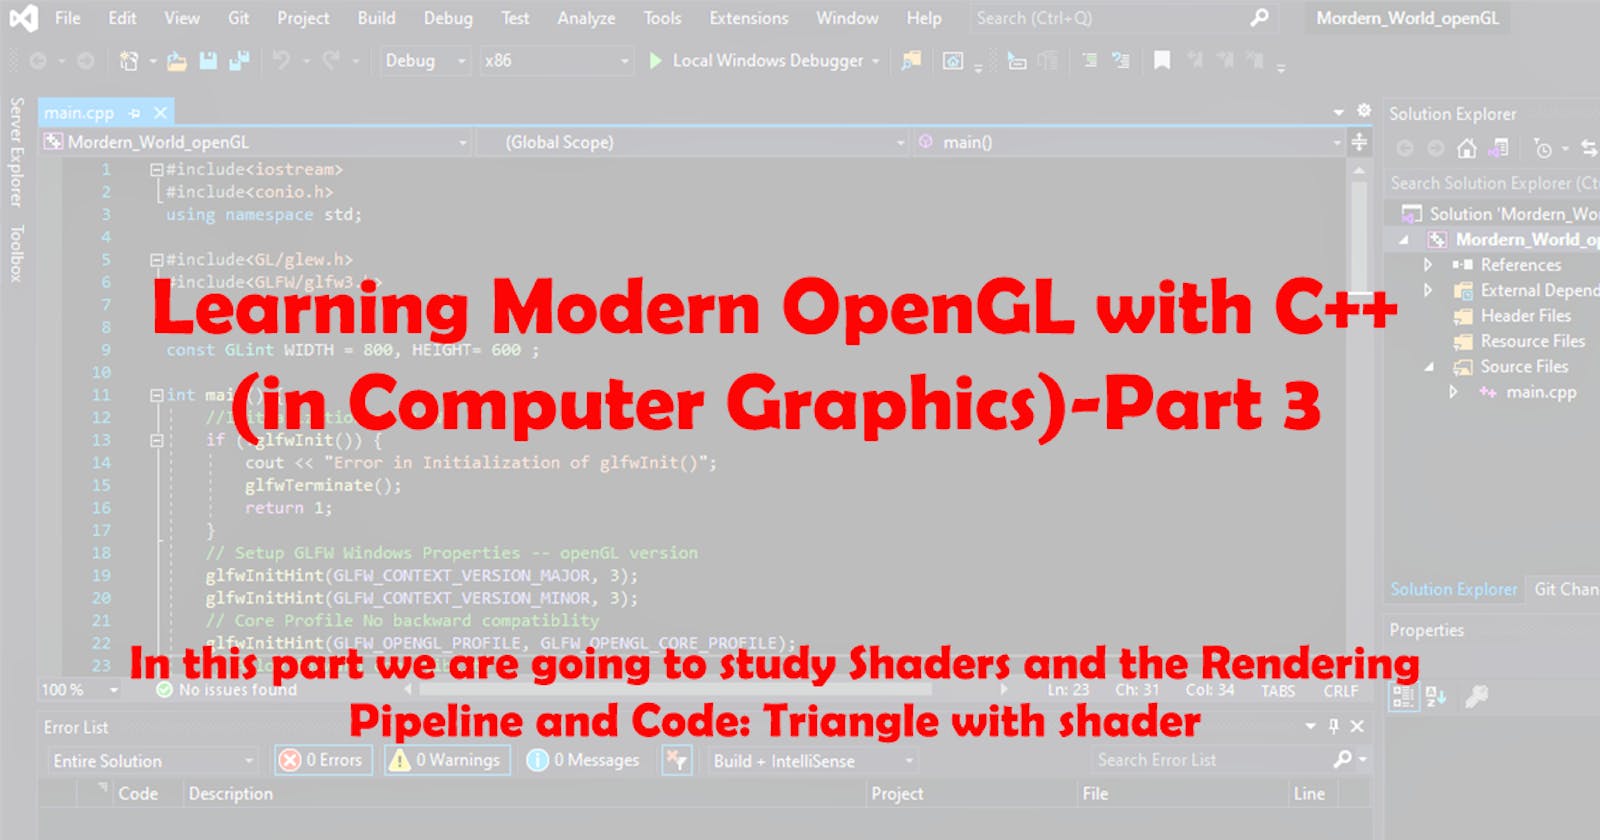 Learning Modern OpenGL with C++ (in Computer Graphics)-Part 3